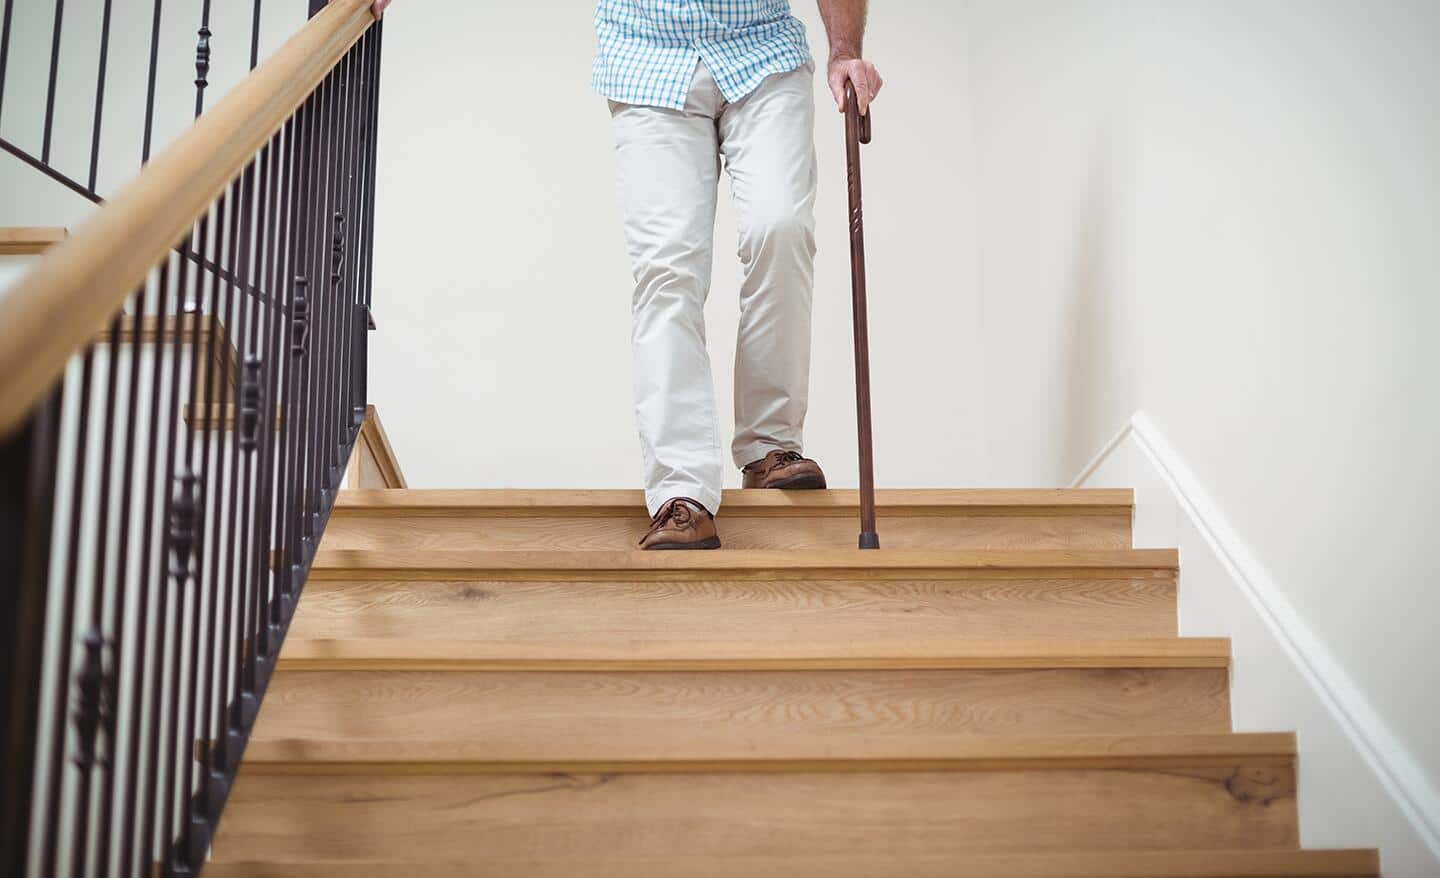 A man, using a walking cane, descends a stairway.